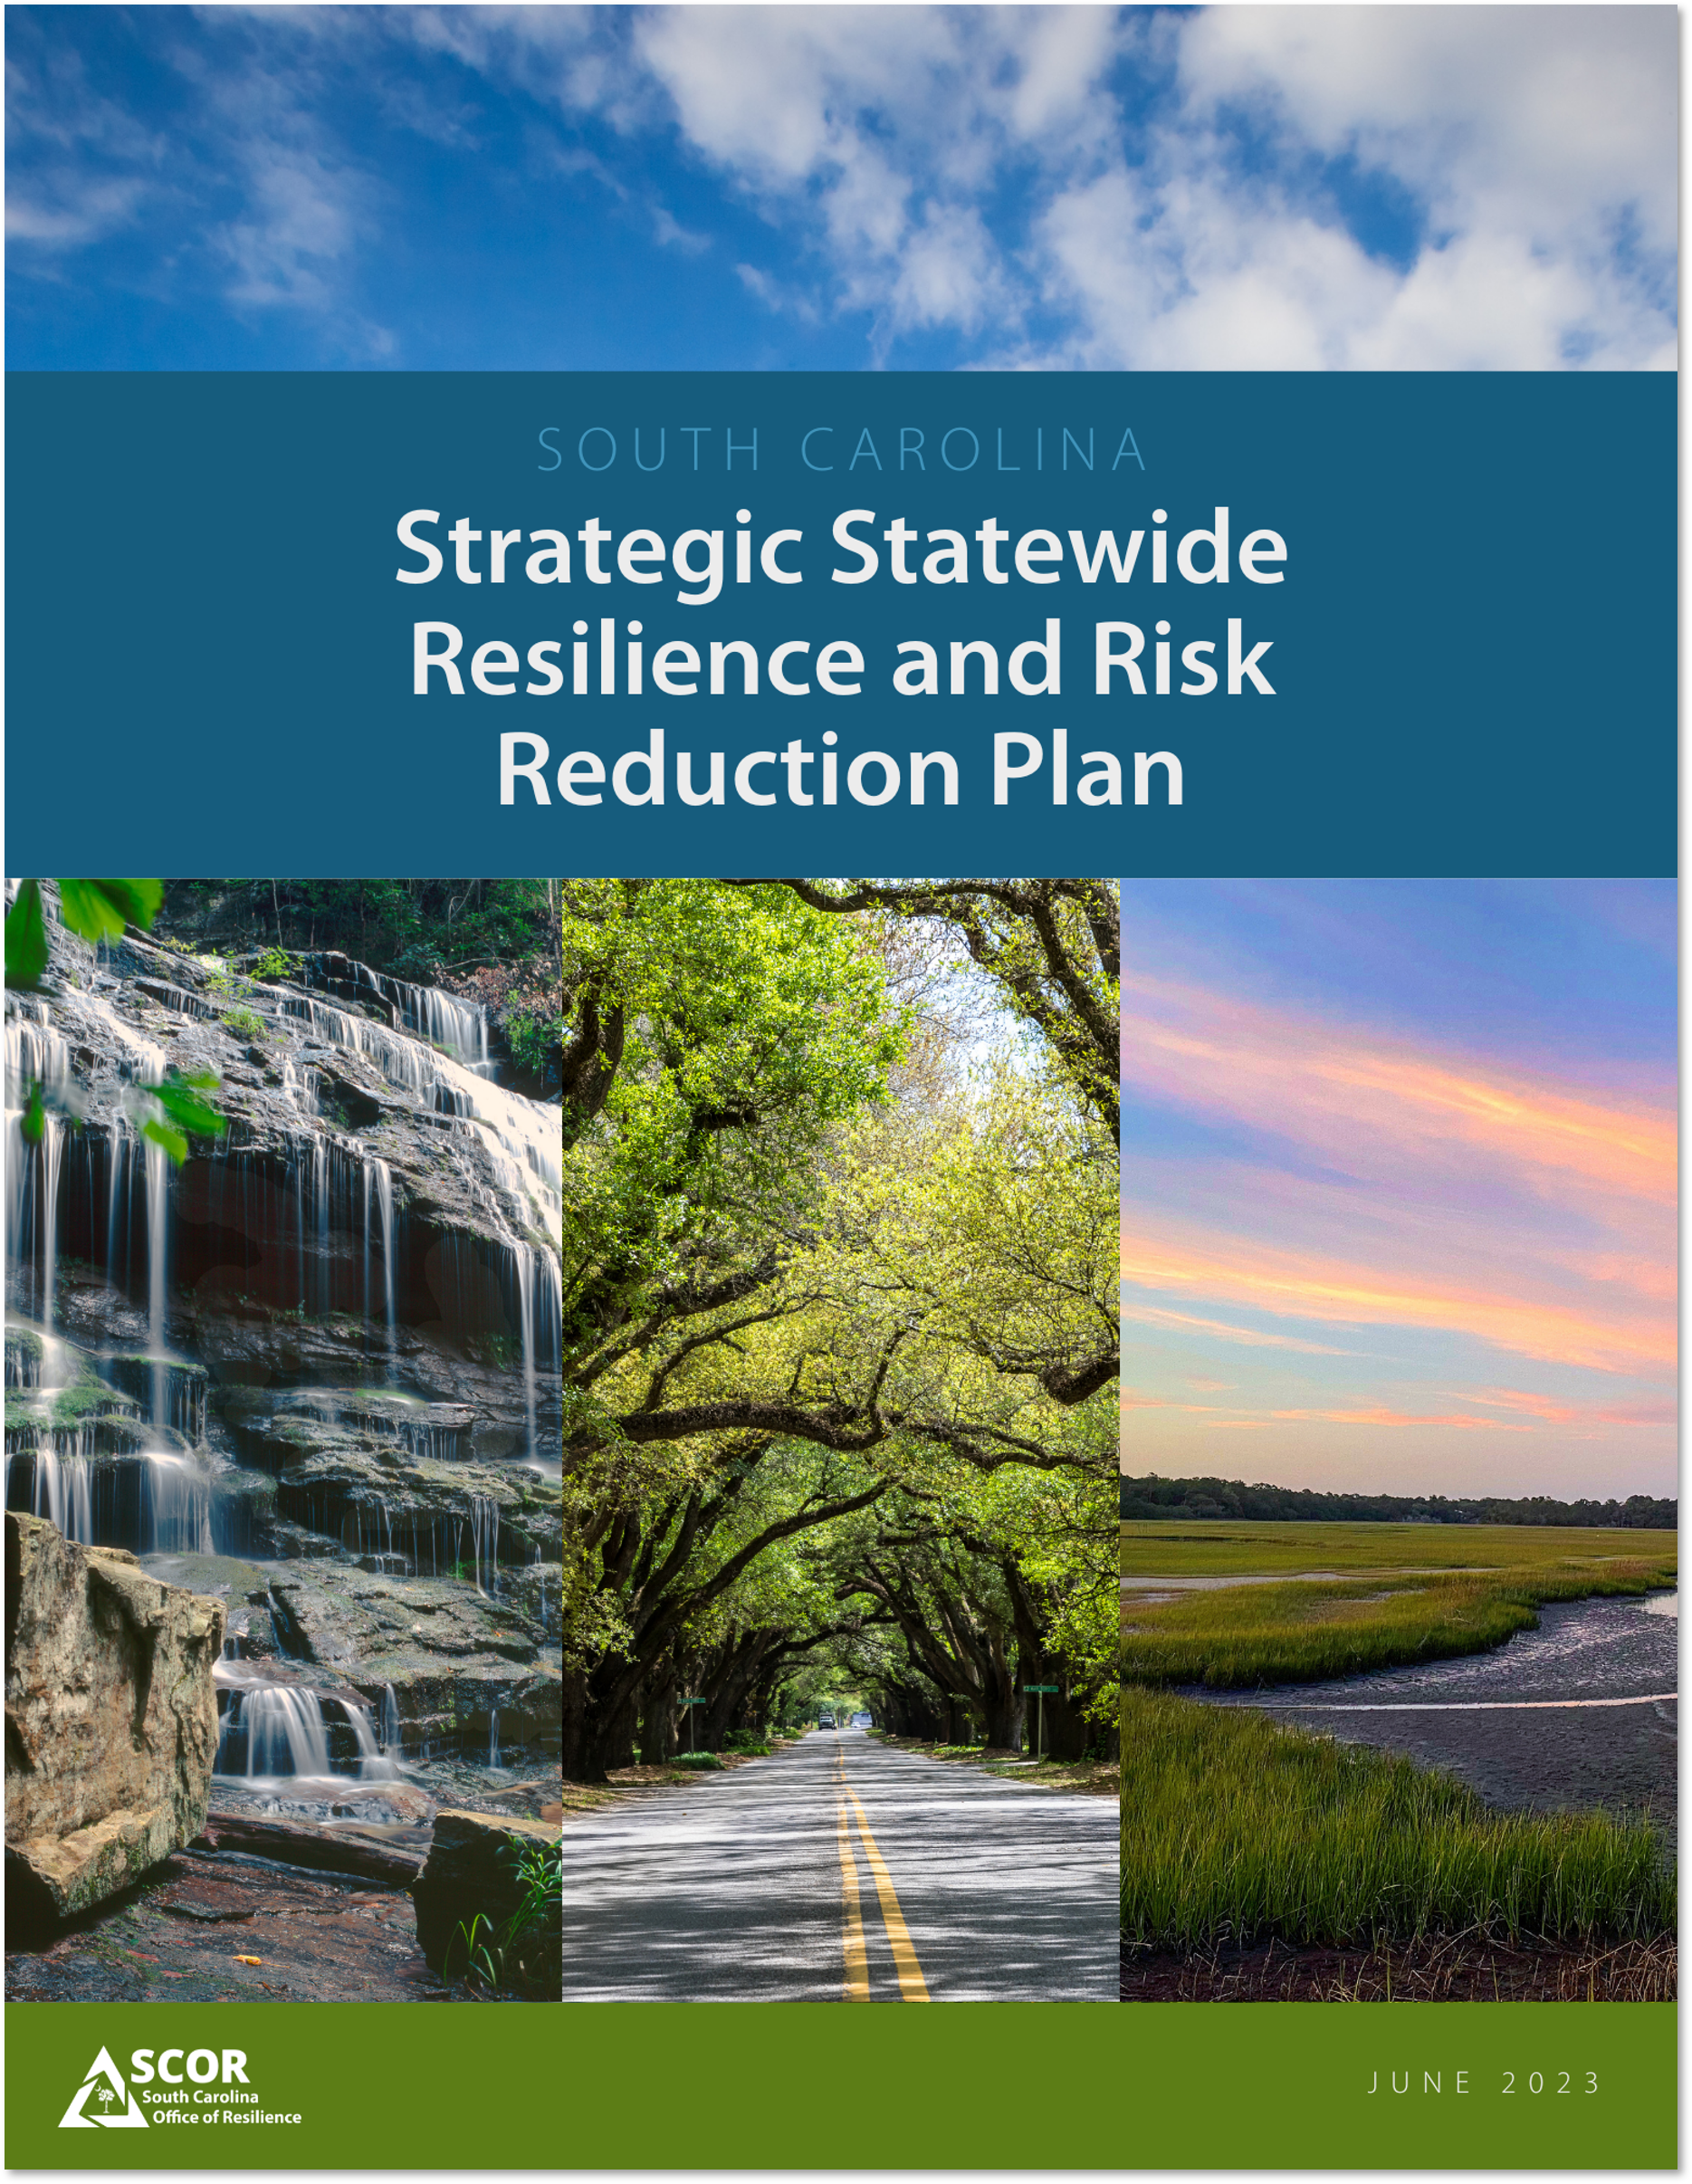 Strategic Statewide Resilience and Risk Reduction Plan